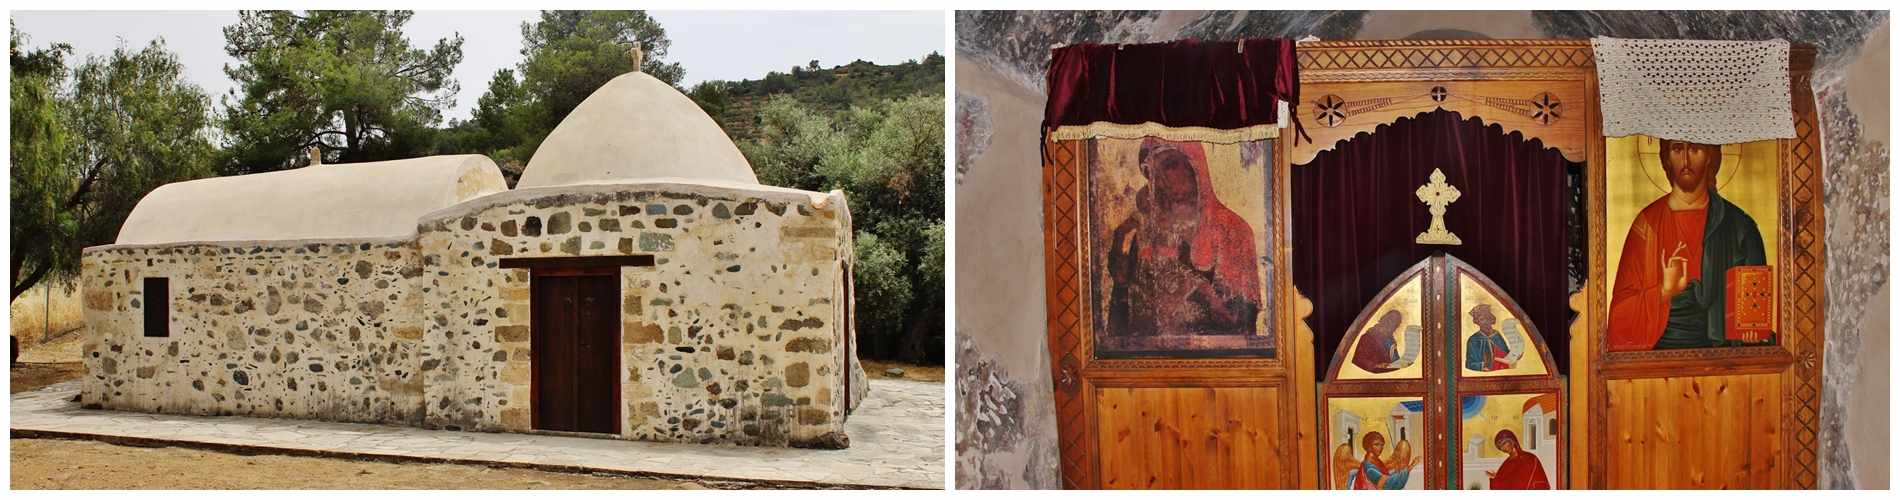 The chapel of Panagia Galoktistis